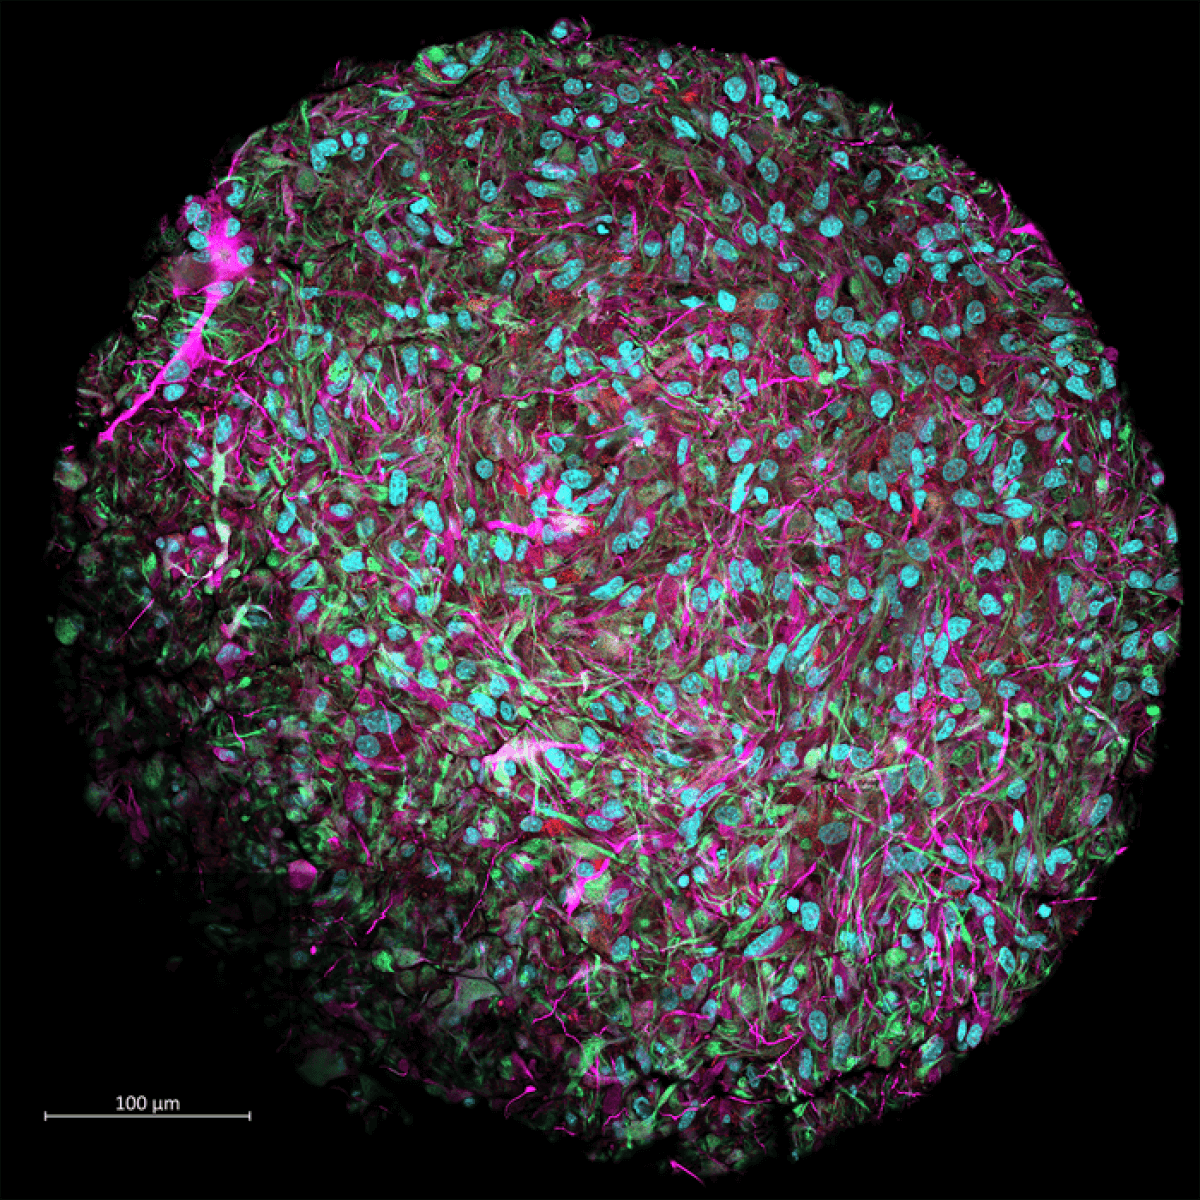 magnified image of a brain organoid